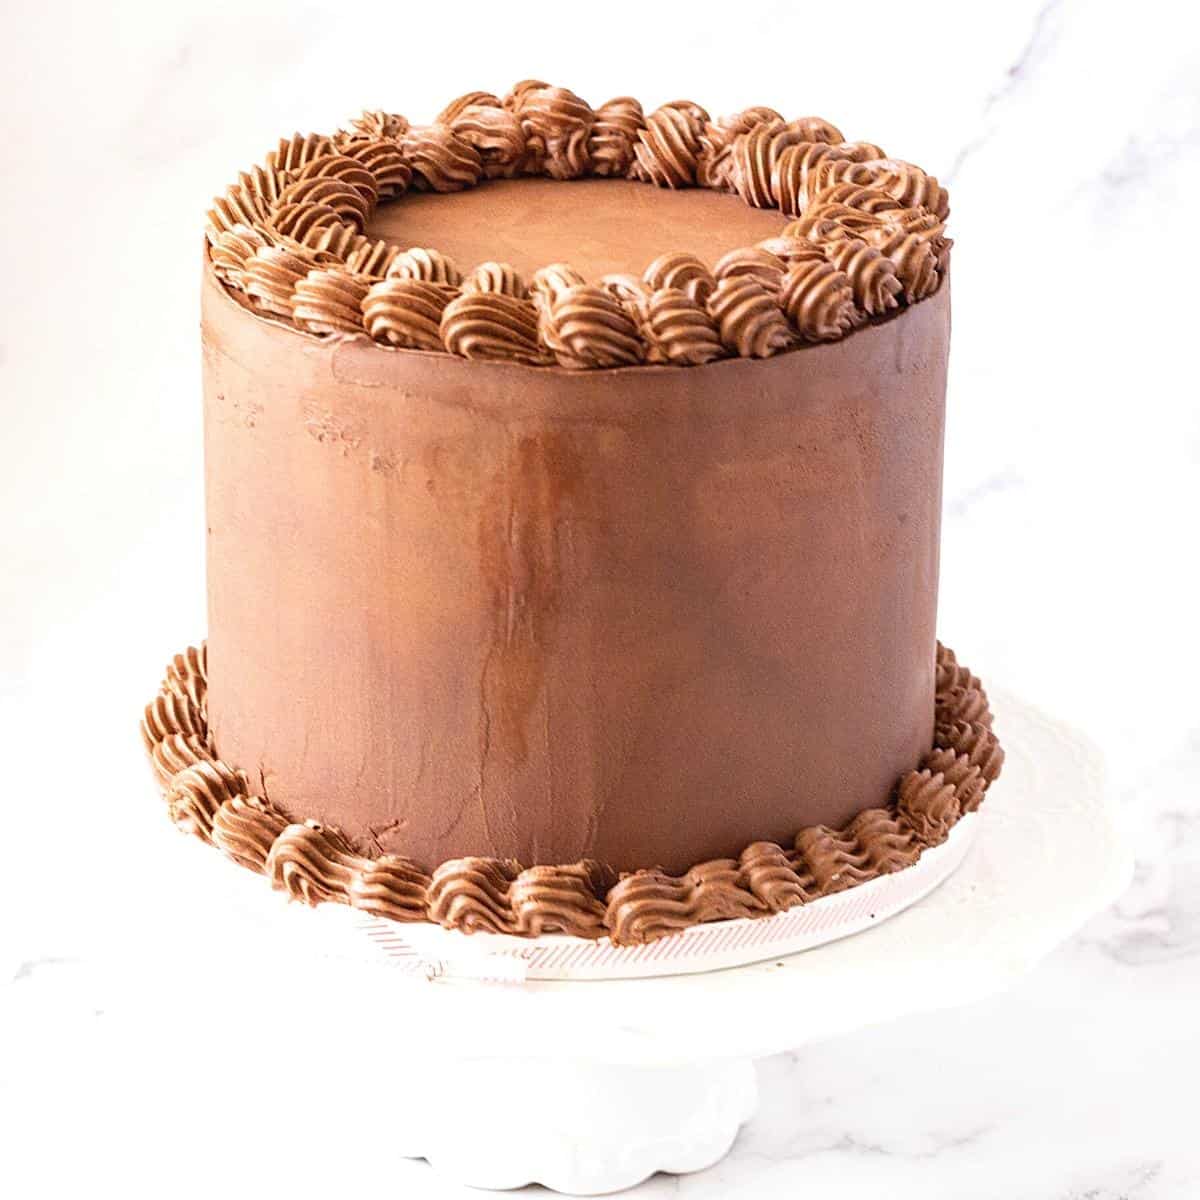 A cake frosted with whipped chocolate ganache.